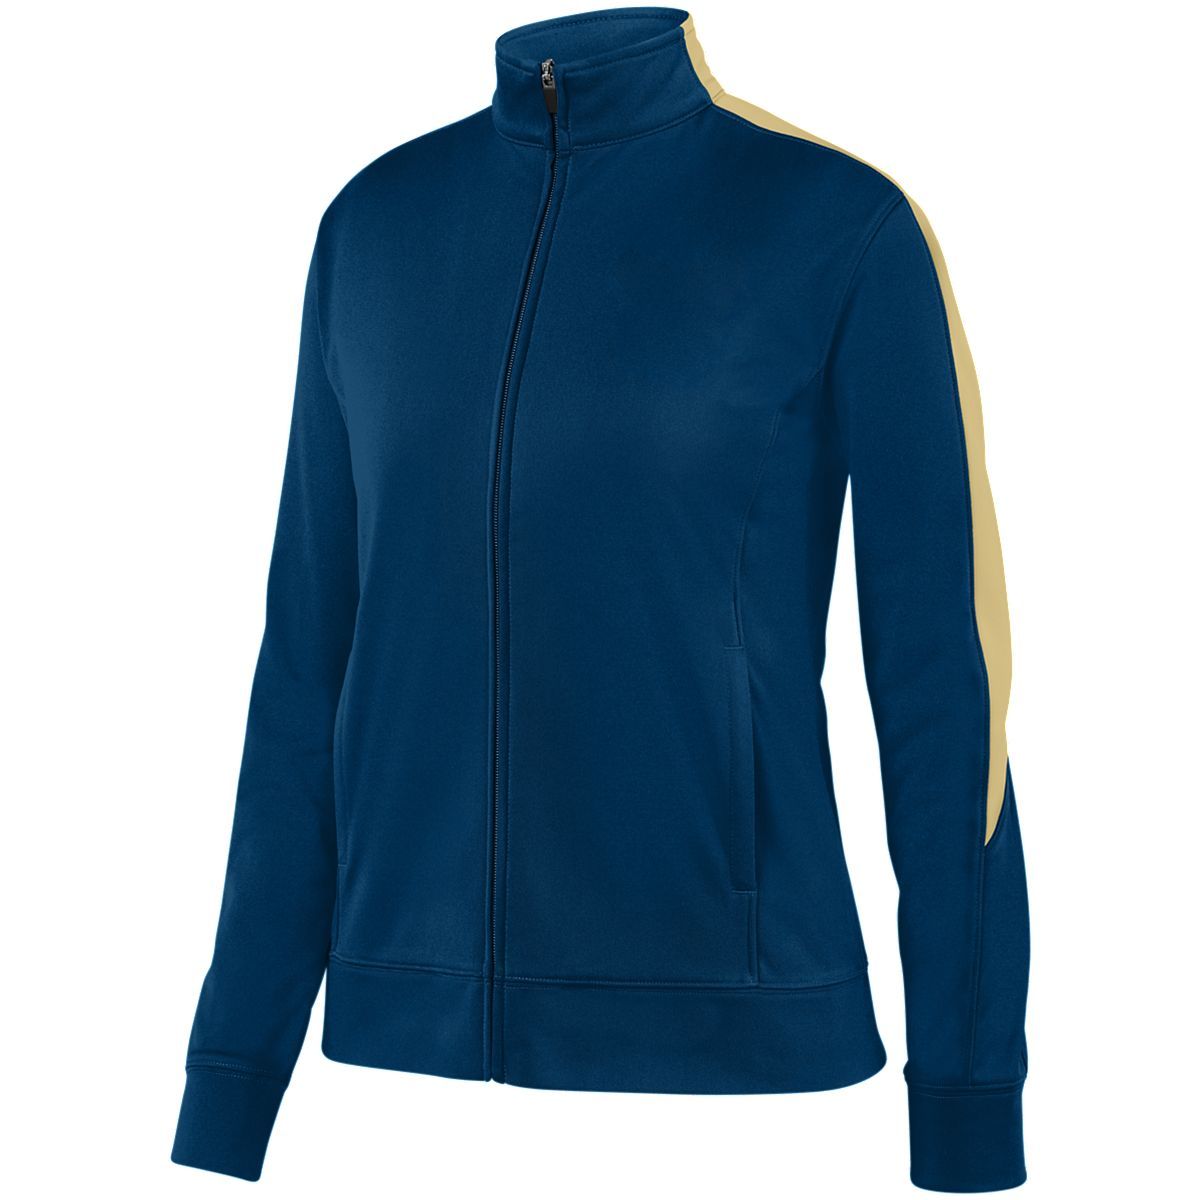 Augusta Sportswear Ladies Medalist Jacket 2.0 in Navy/Vegas Gold  -Part of the Ladies, Ladies-Jacket, Augusta-Products, Outerwear product lines at KanaleyCreations.com